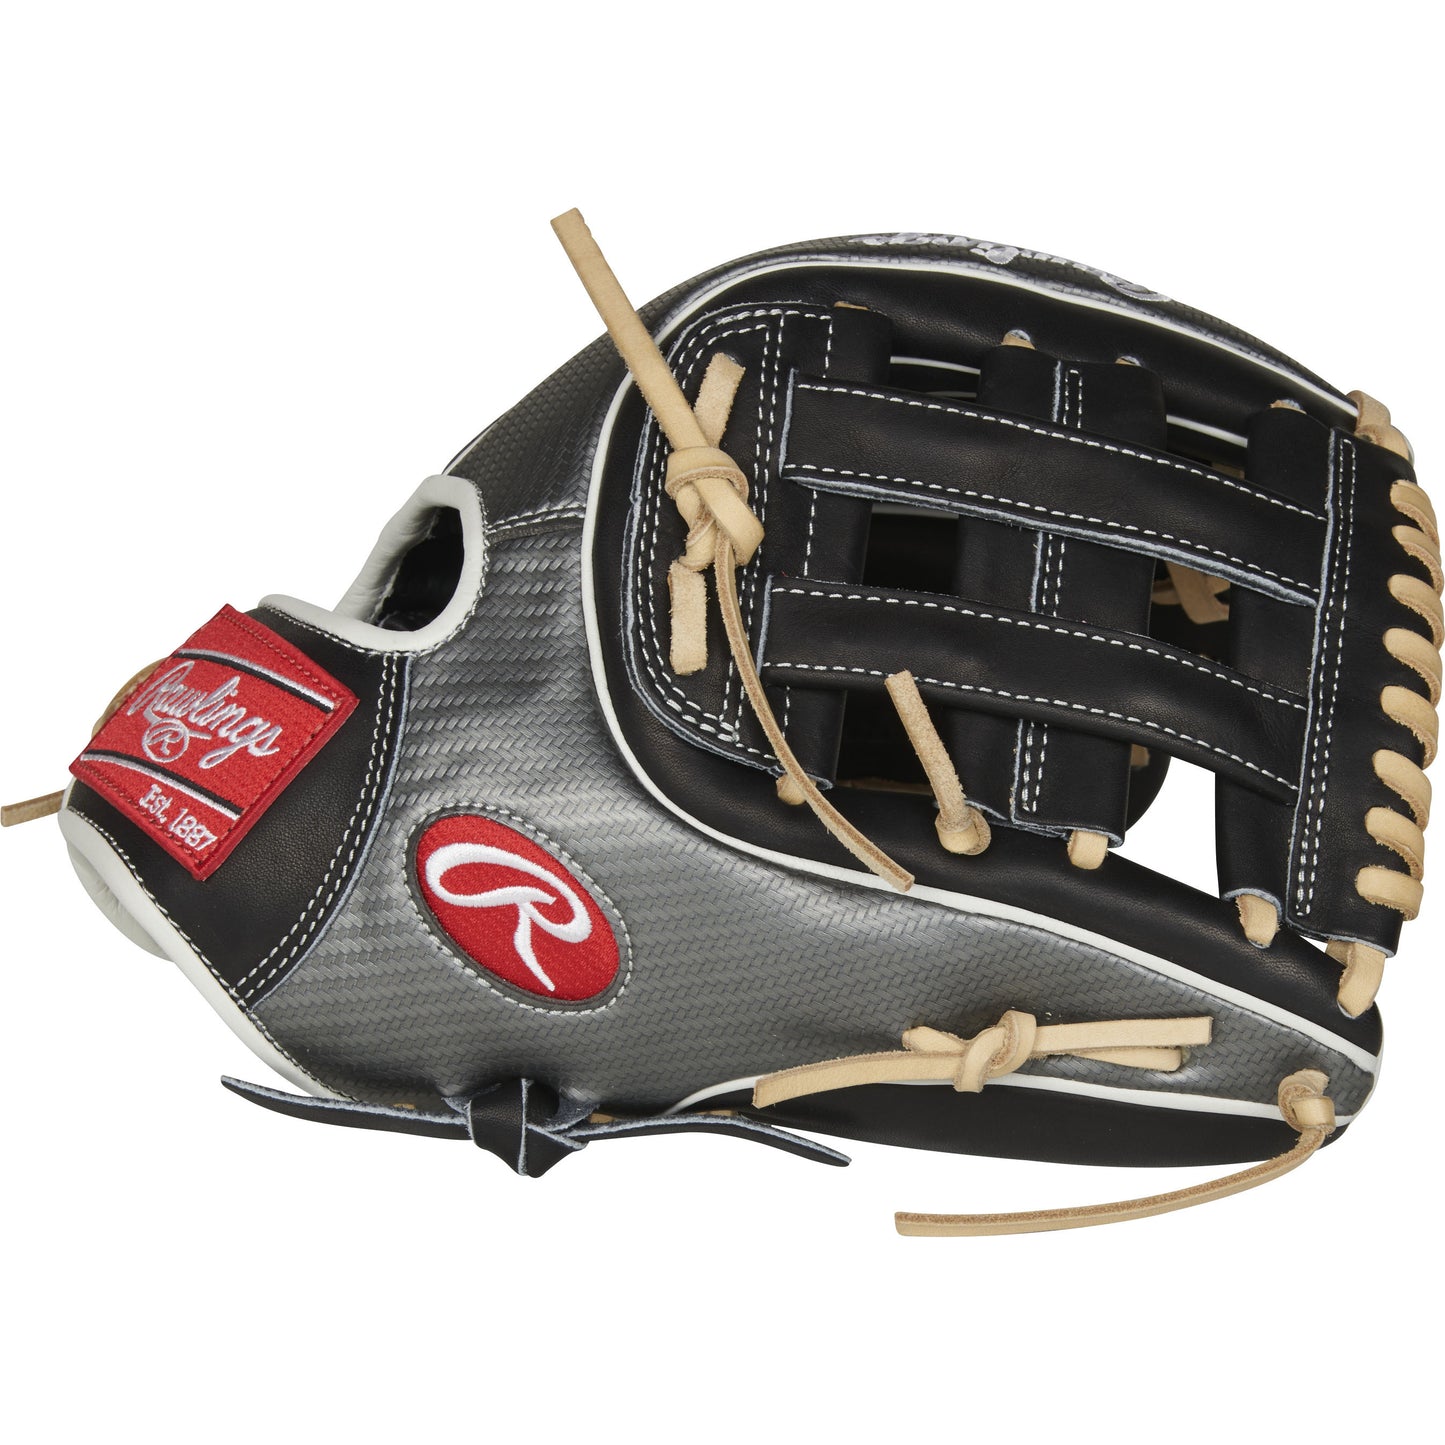 Rawlings Heart of the Hide 11.75" Glove-PRO315-6BCF